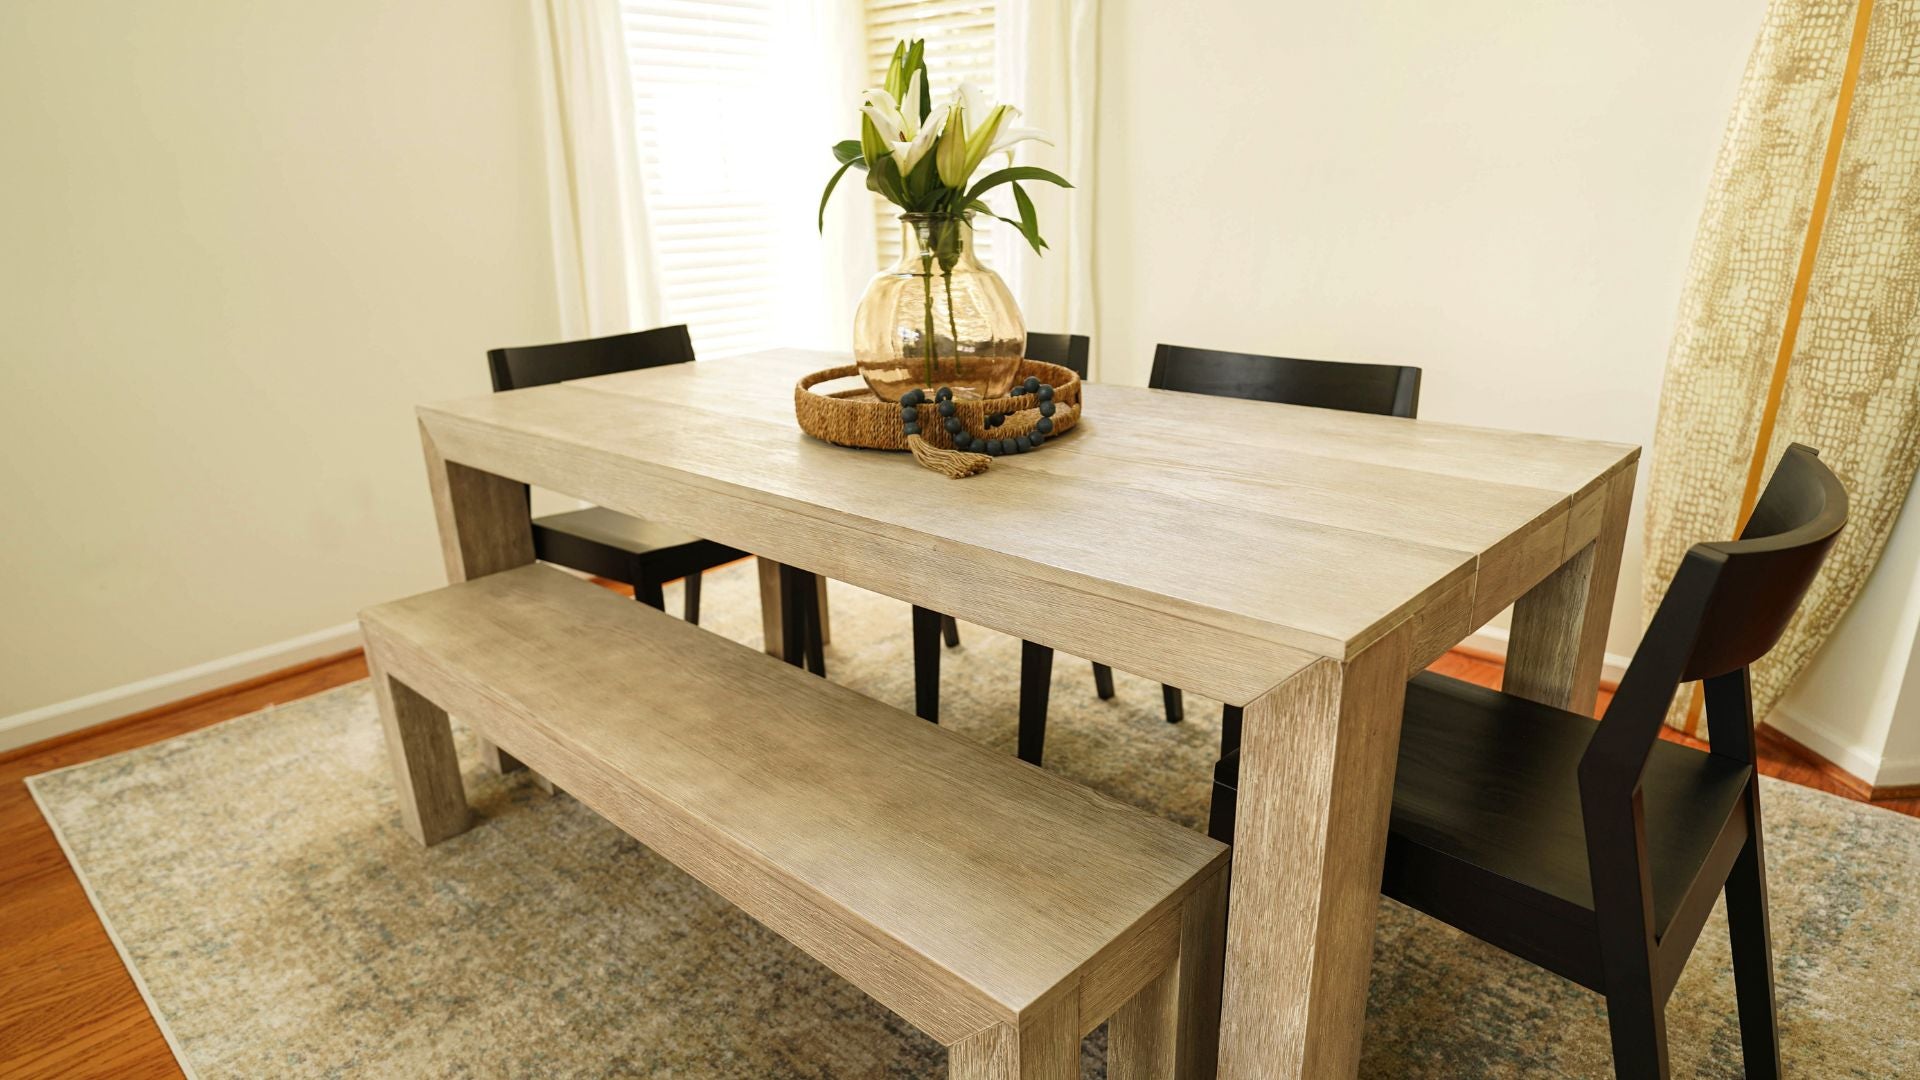 wooden table for dining with dining bench and black chairs